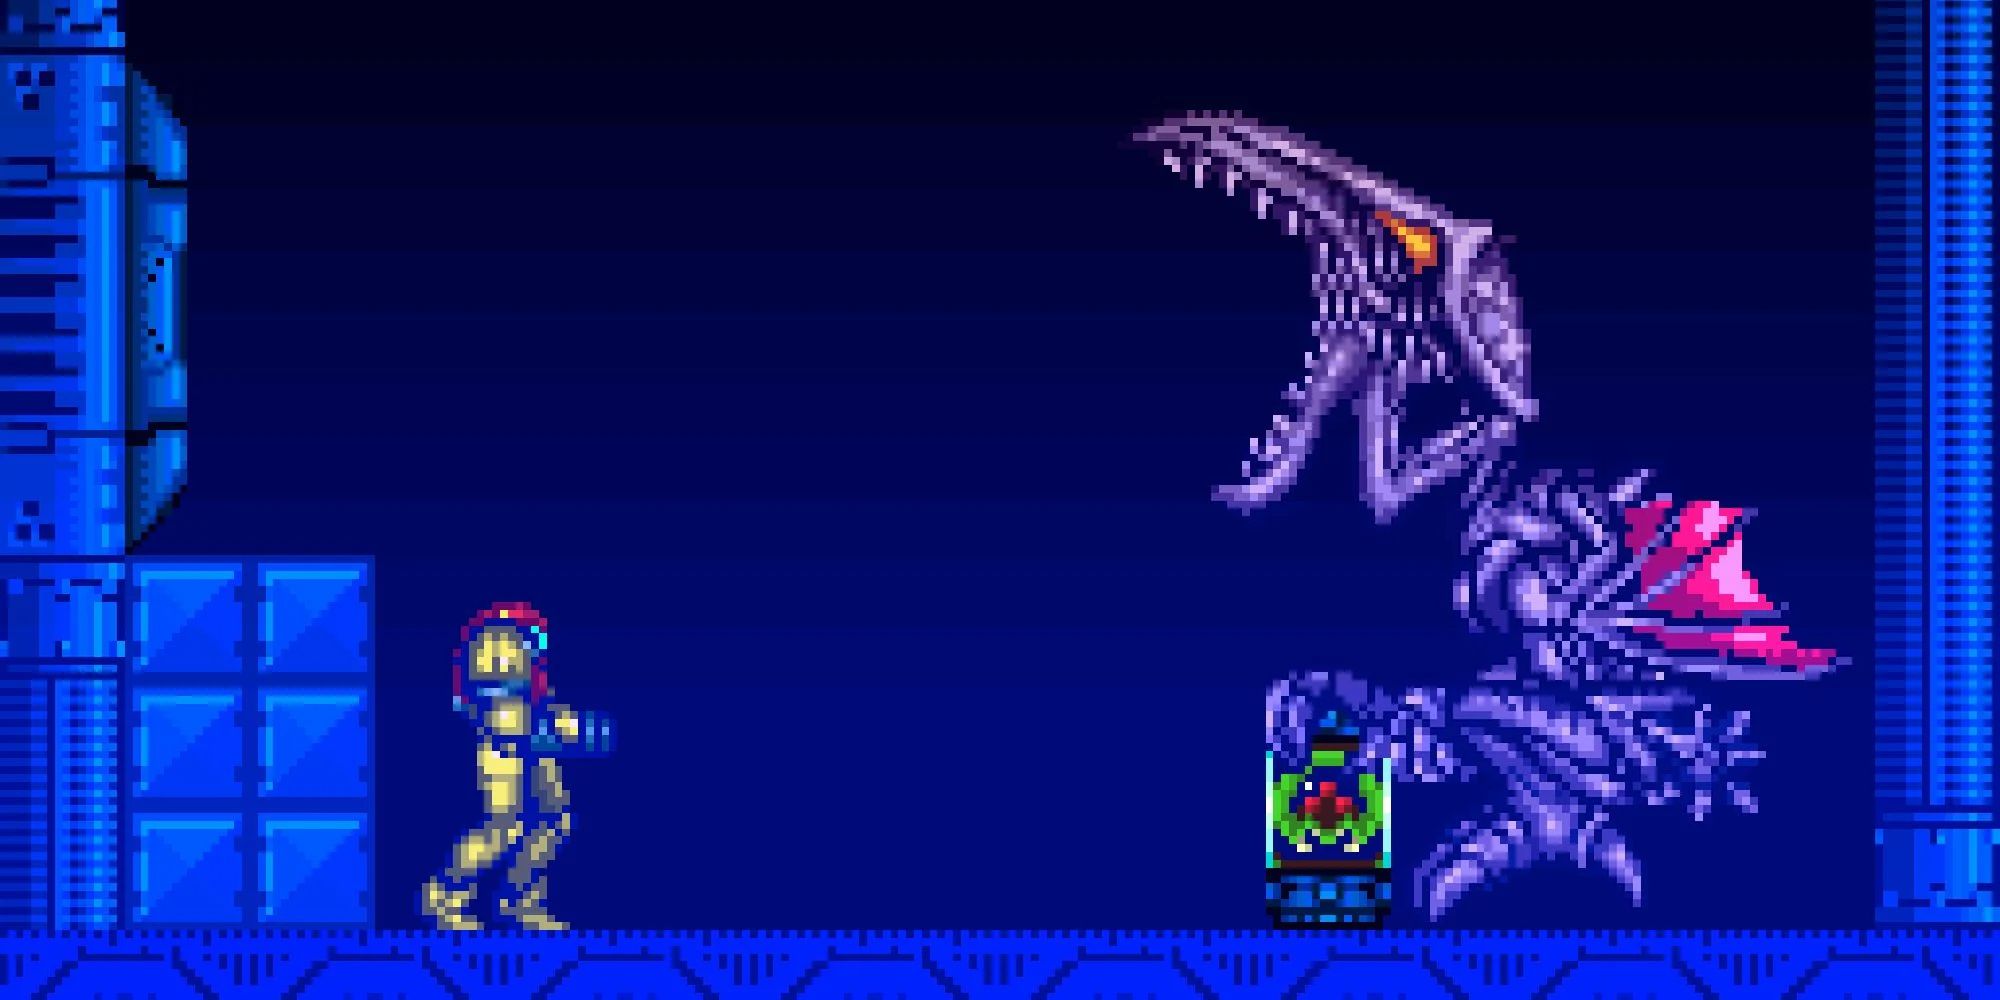 Samus encountering Ridley and the kidnapped Baby in Super Metroid